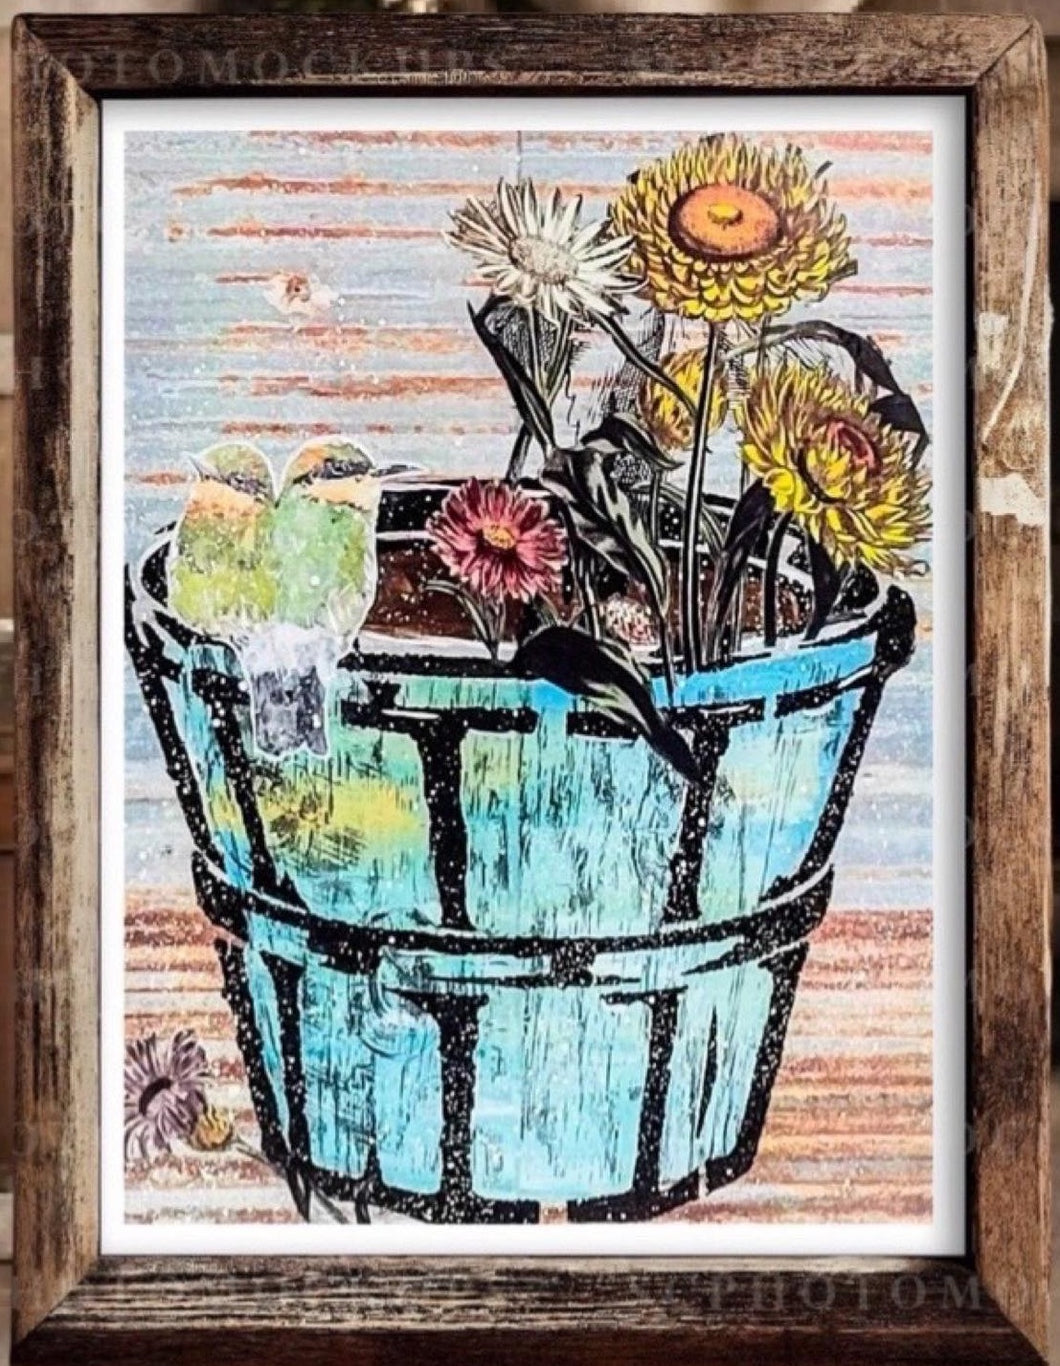 Mixed Media Class (frame not included) - April 9 - ADULTS ONLY